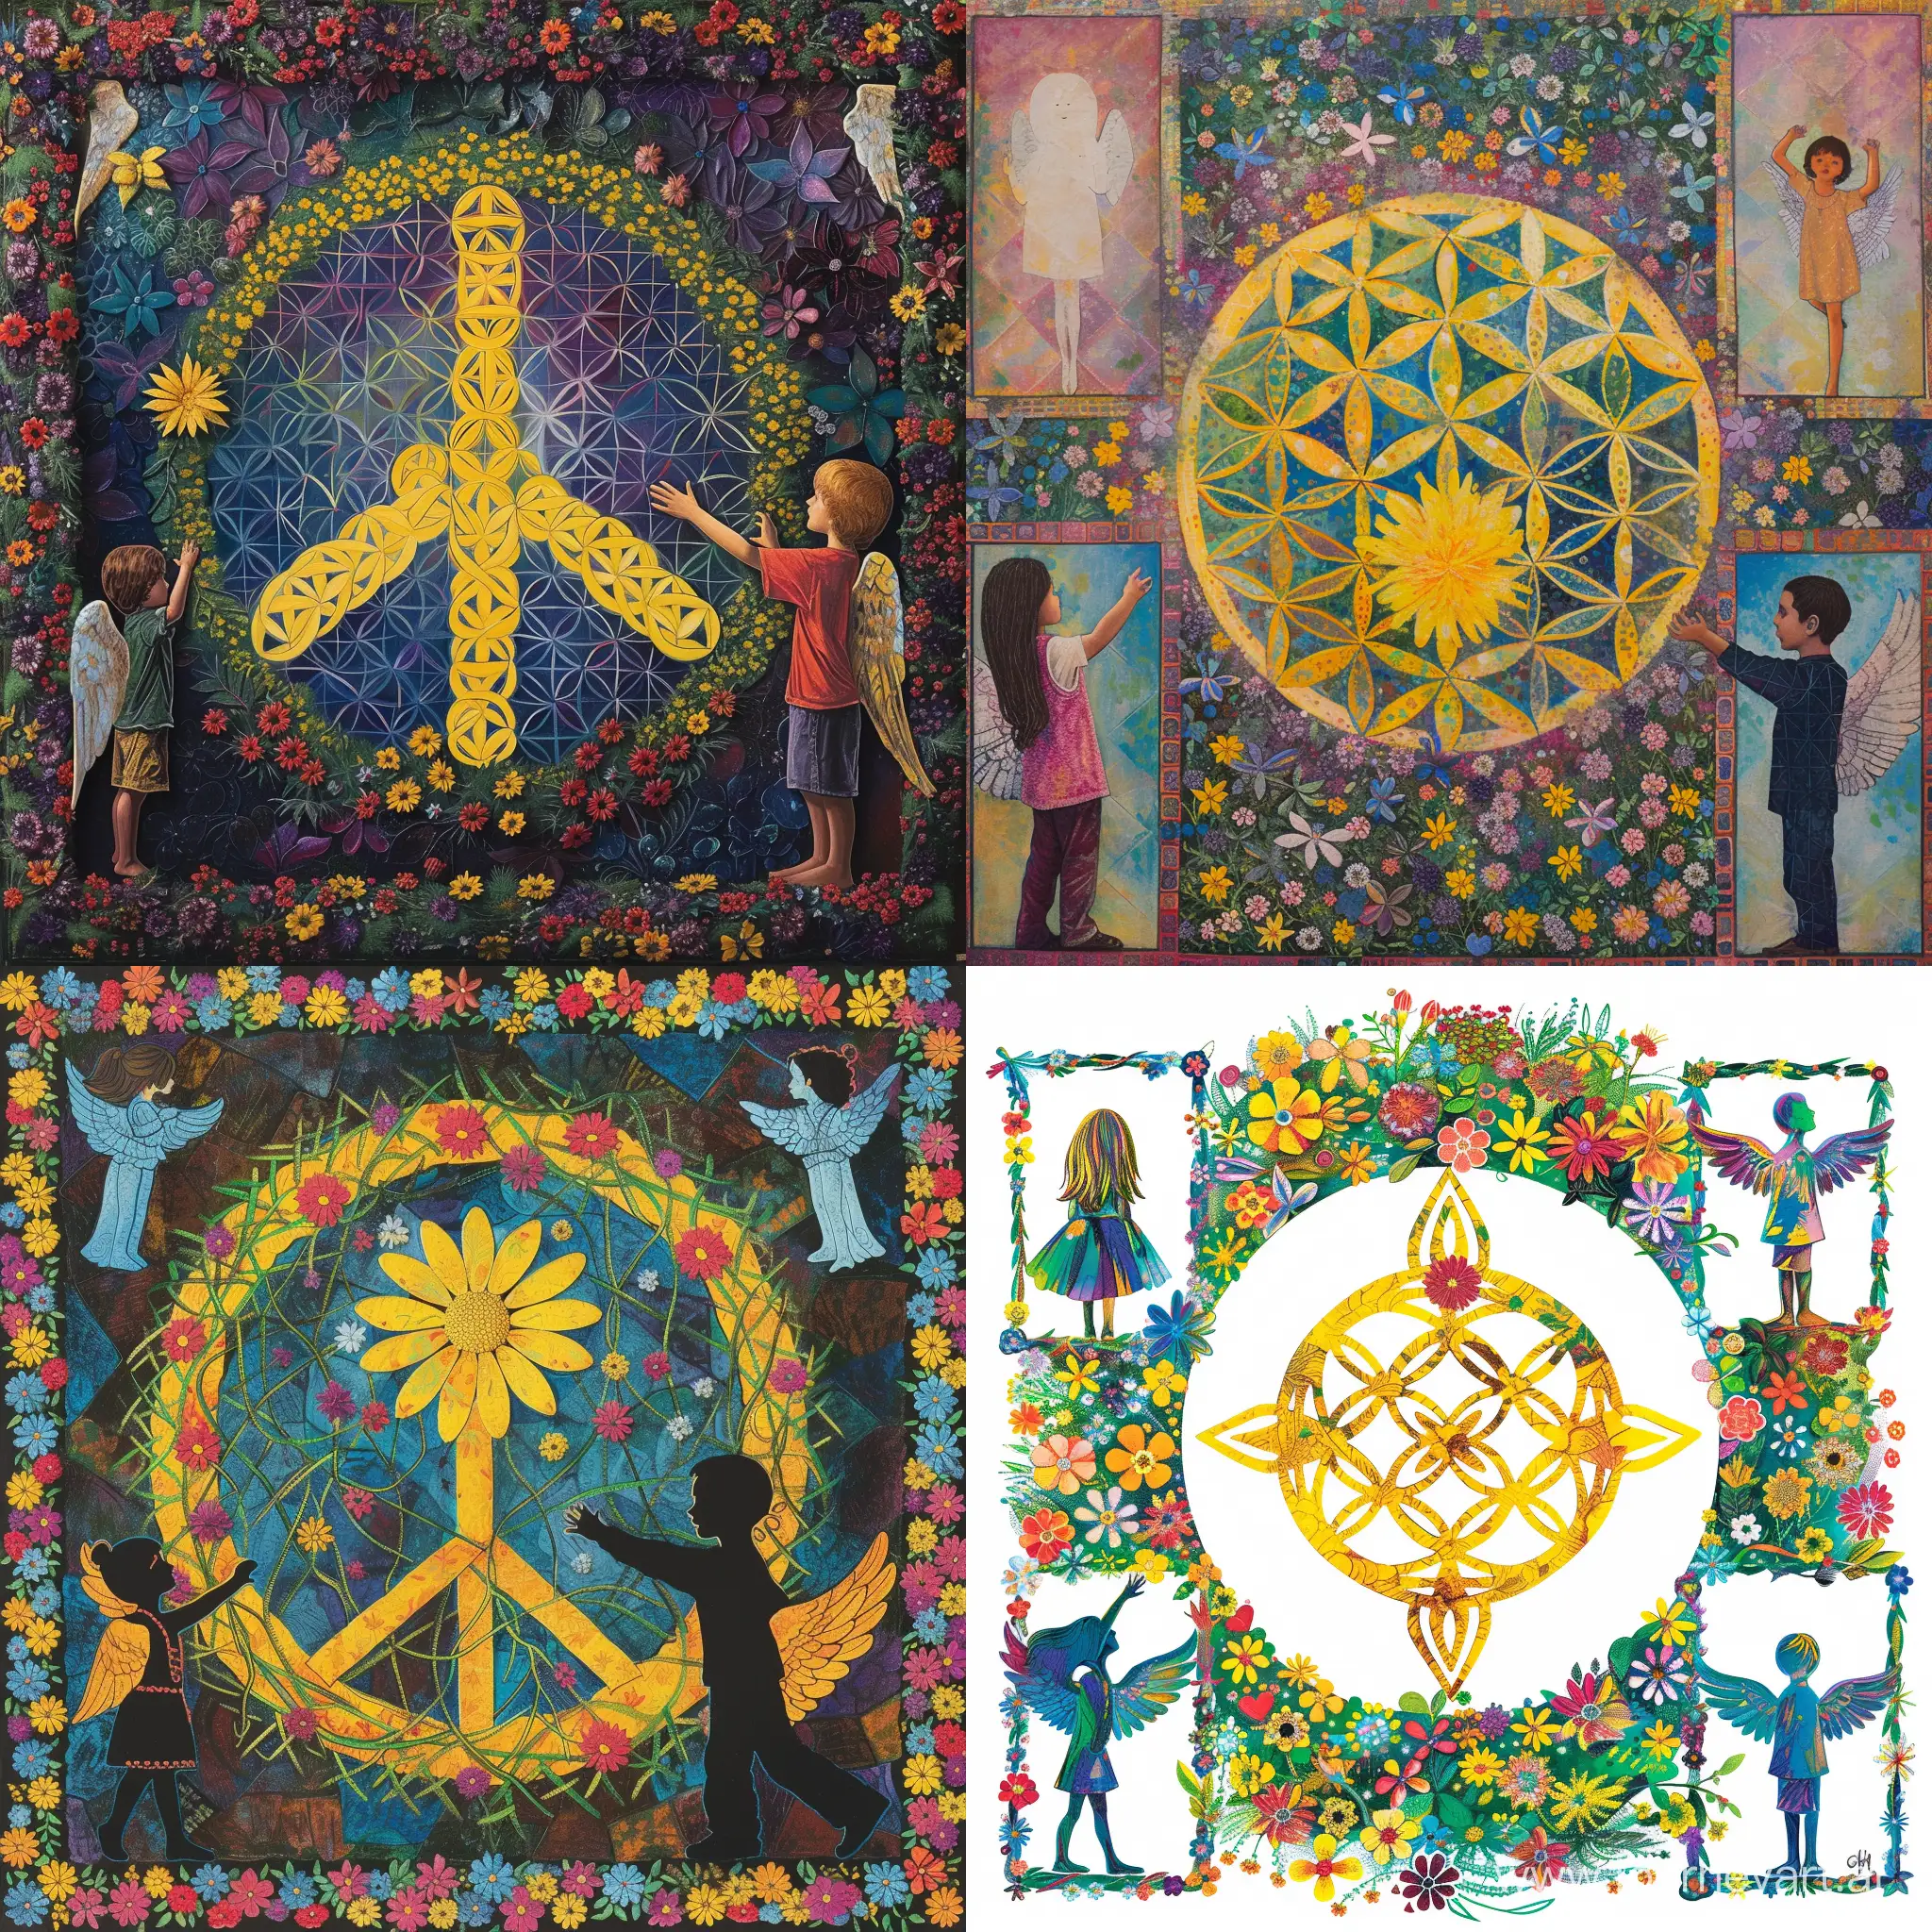 A symbol of peace, colorful and alive, interwoven with flowers all around the circle. On the sides of the circle, within frames, to the right and left, a boy and a girl standing in profile appear as little angels, reaching towards the center where the yellow flower of life blooms